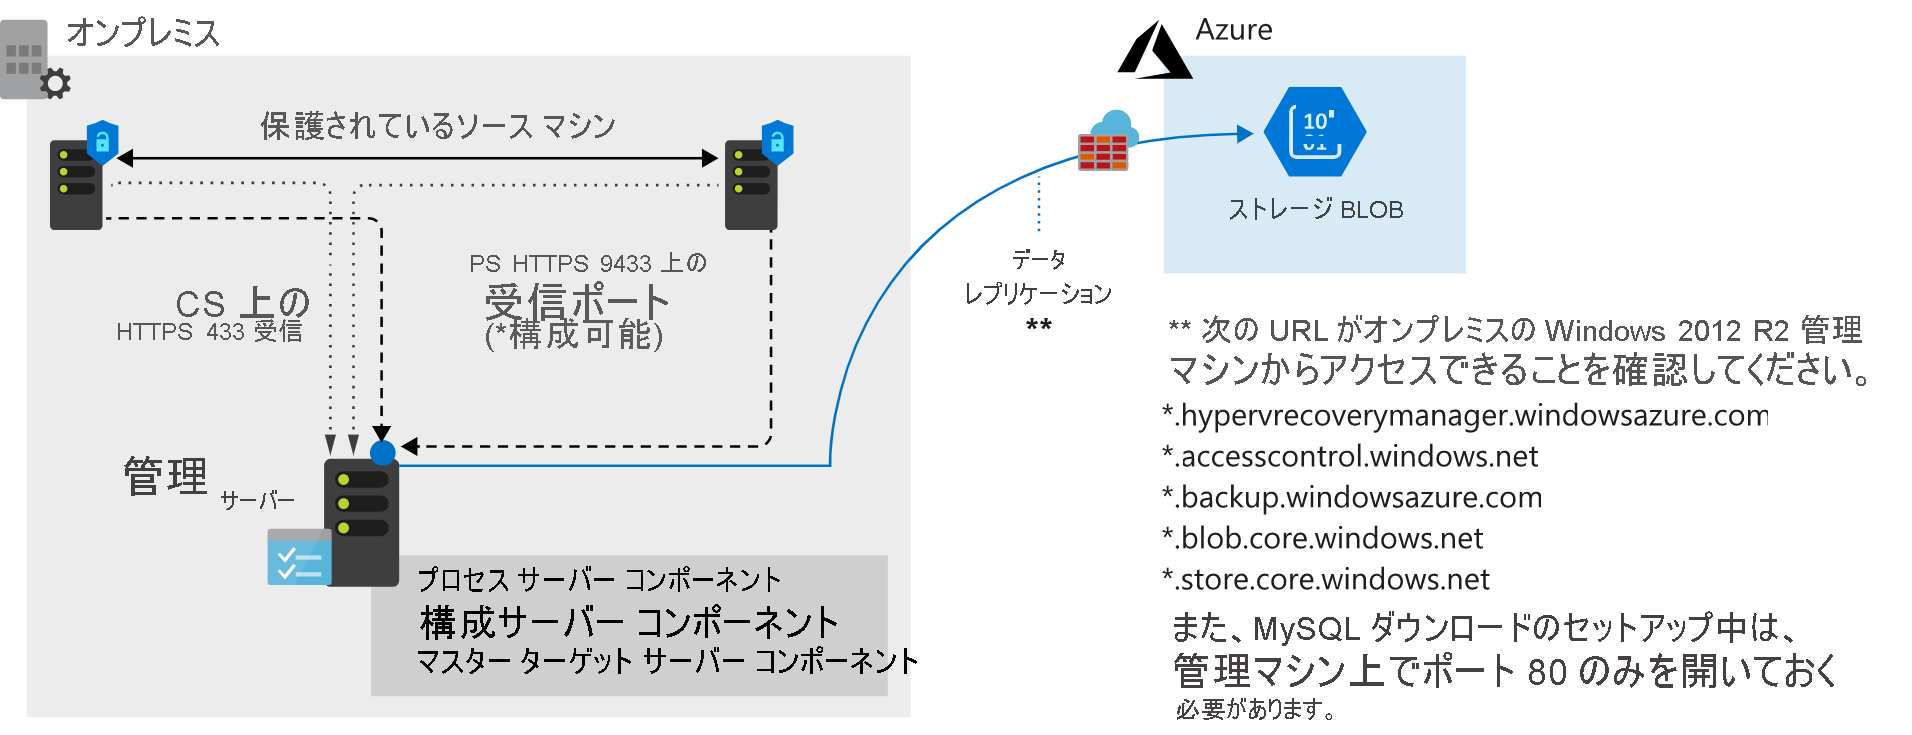 Azure Site Recovery architecture.